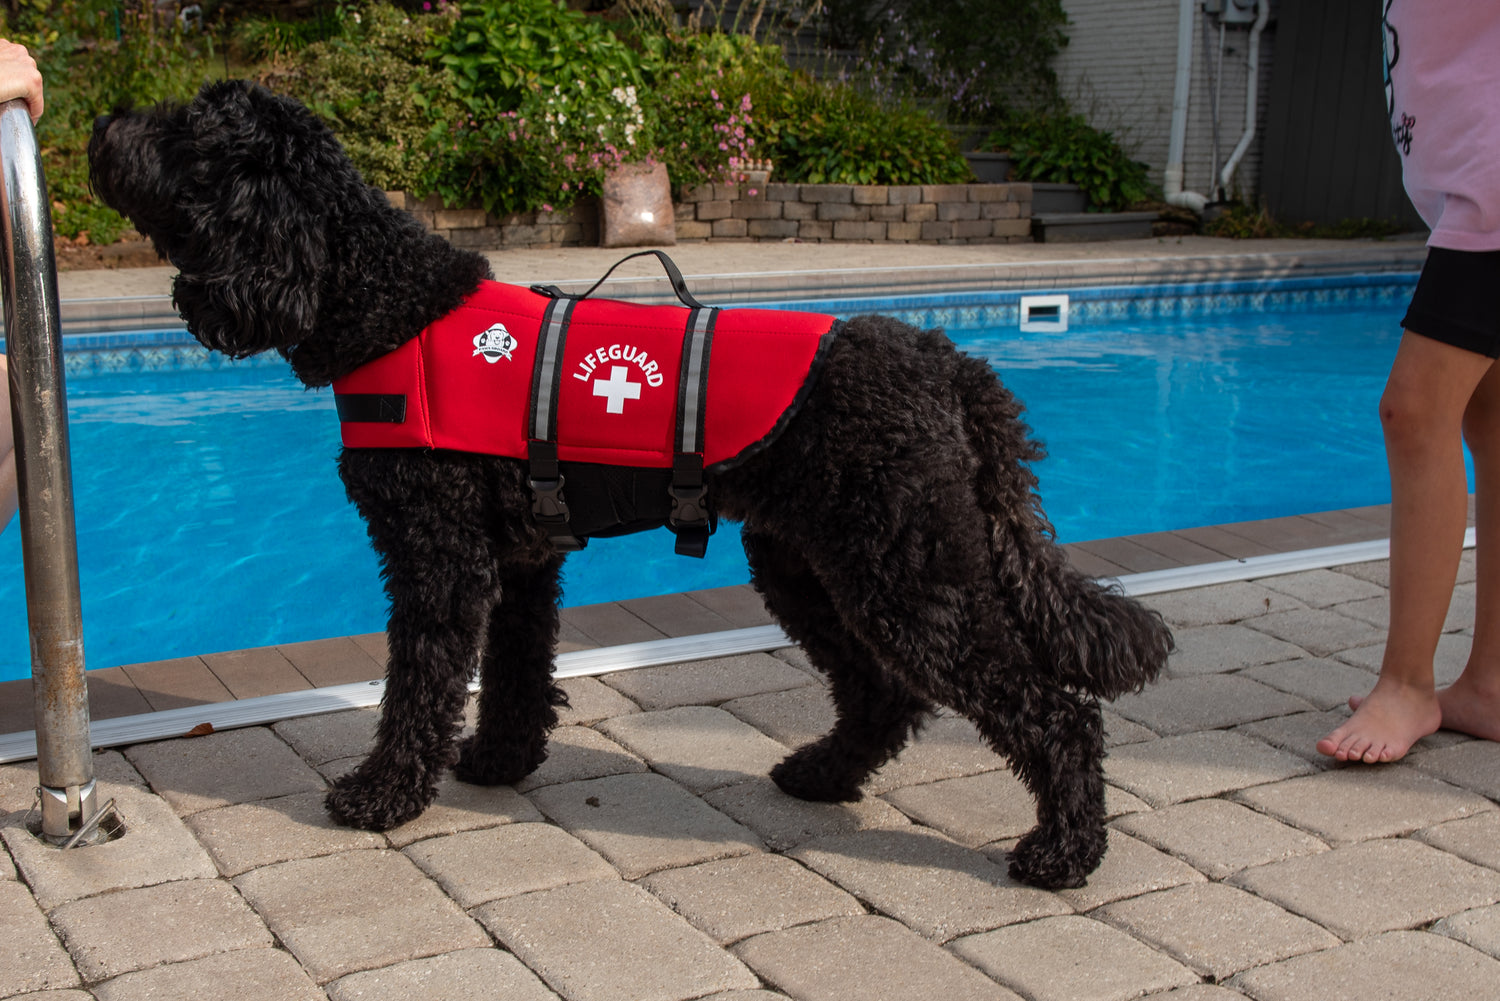 Black Labradoodle wearing a bright red Lifeguard dog life jackets by Paws Aboard from Fido Pet Products standing near the edge of an in-ground backyard swimming pool with a child on the right side of the image.  Terraced garden in the background.